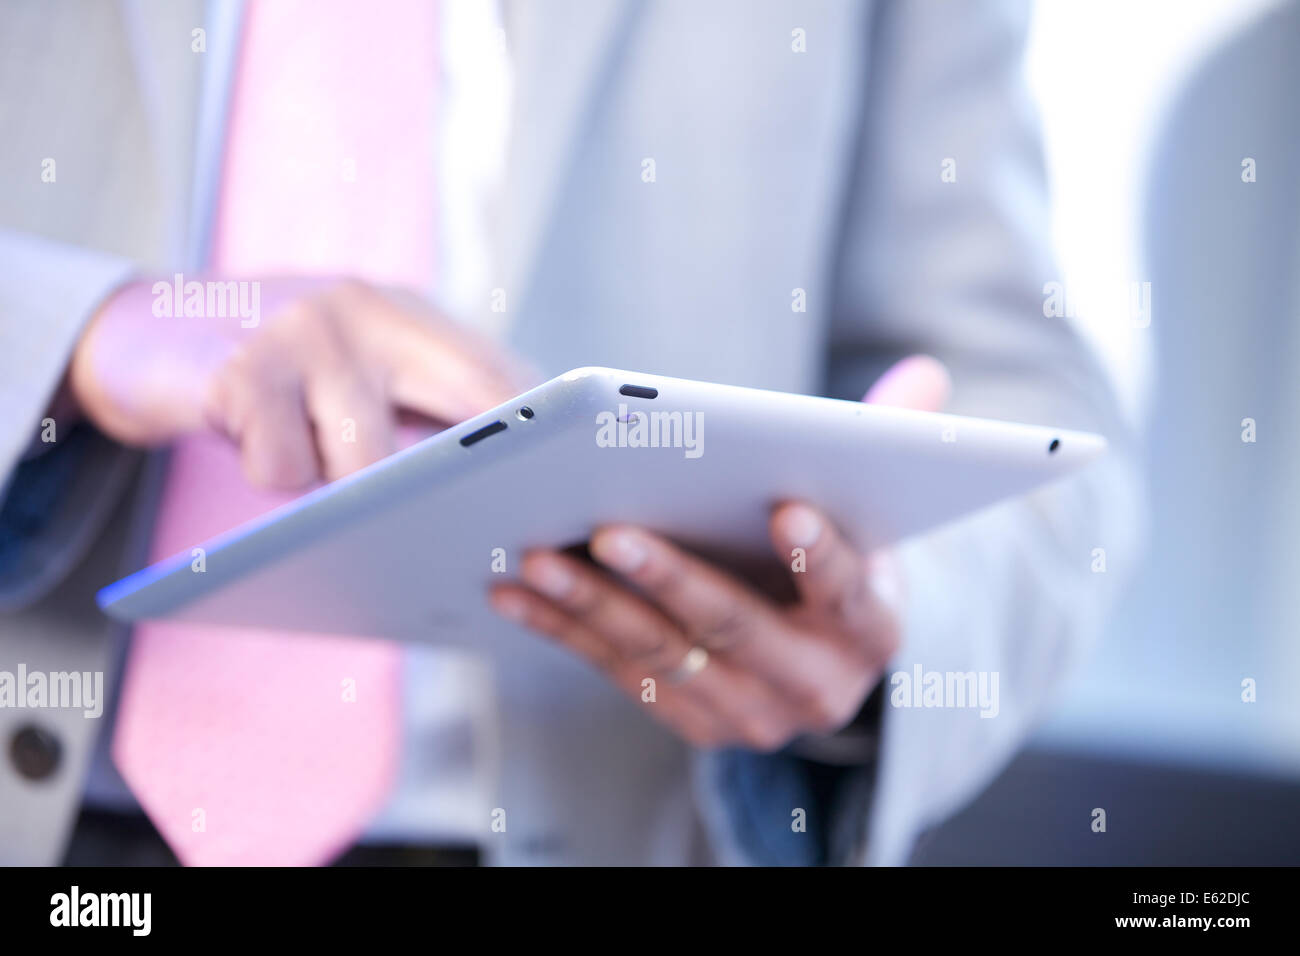 man in suit using iPad slate close up no face Stock Photo